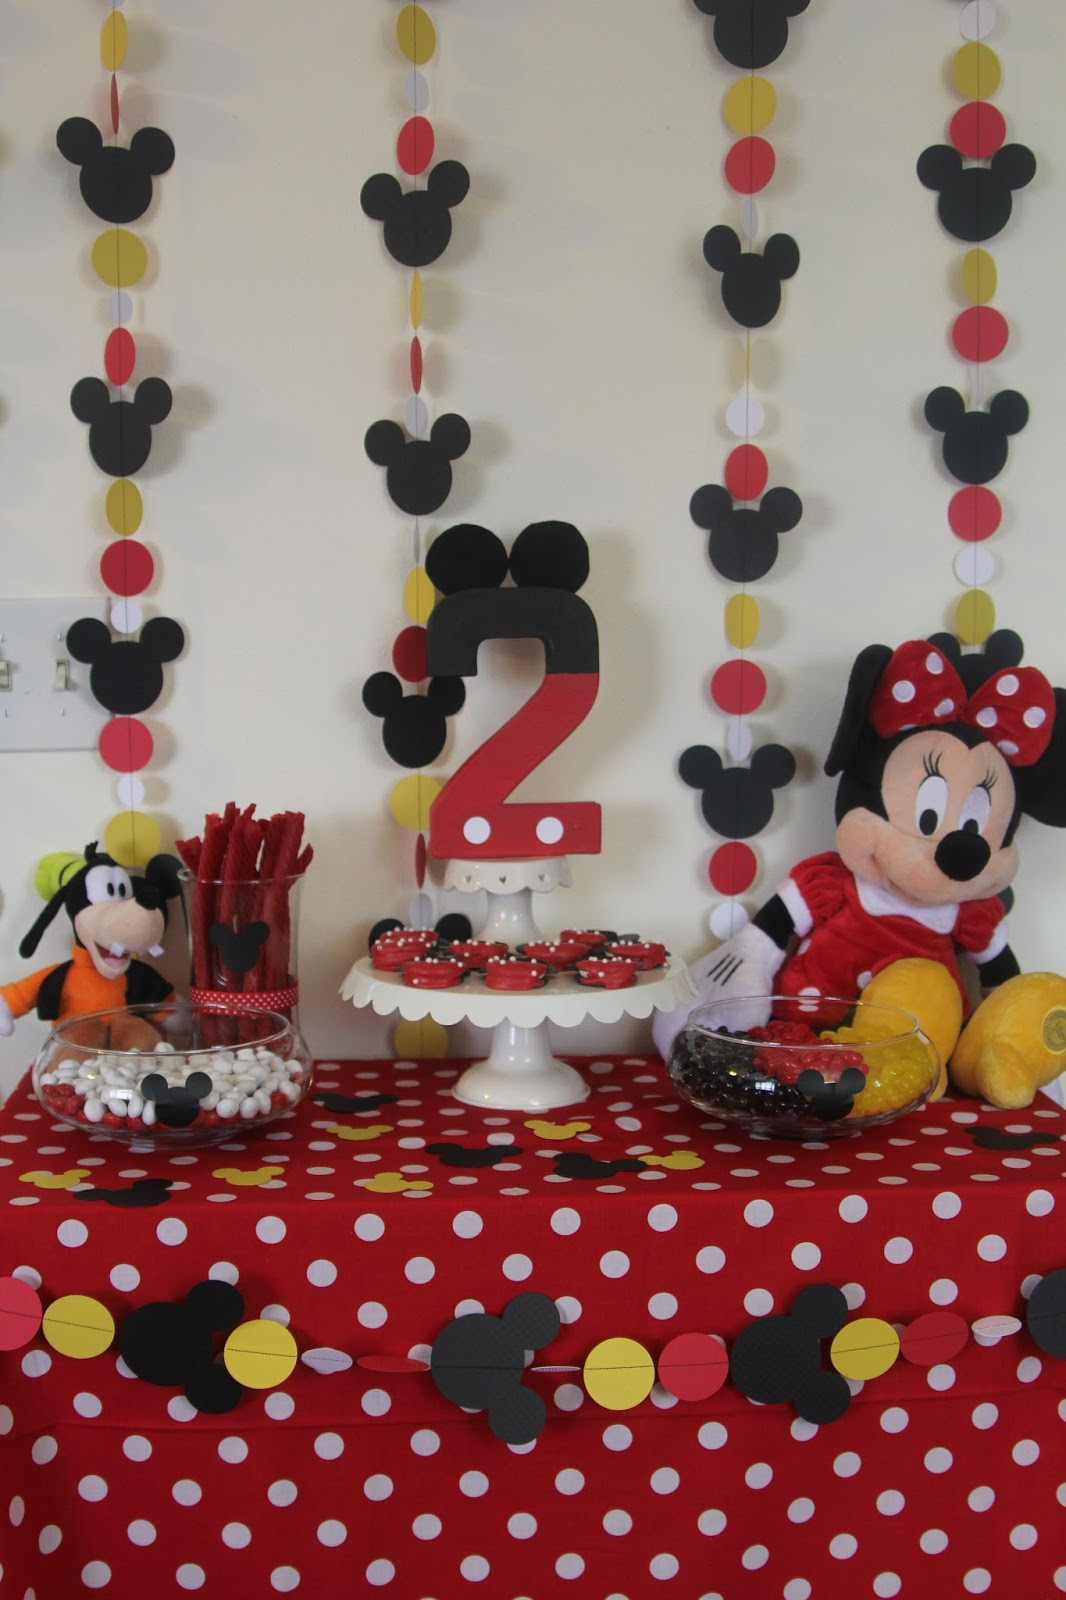 Minnie Mouse Birthday Decor
 Decorating the Dorchester Way Simple Red Minnie Mouse